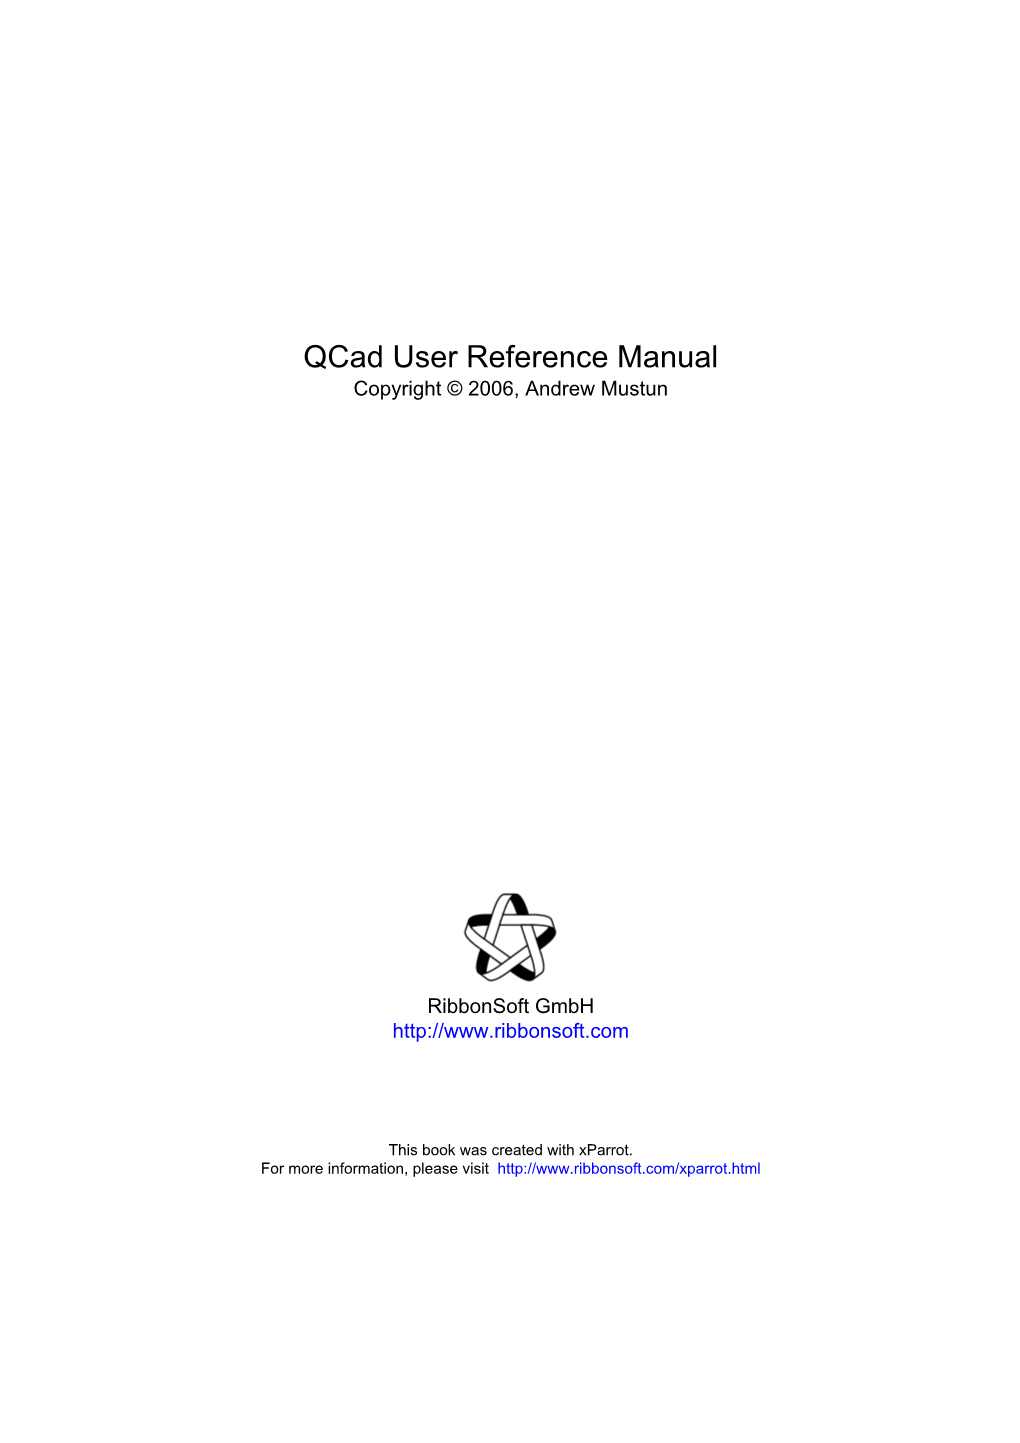 Qcad User Reference Manual Copyright © 2006, Andrew Mustun